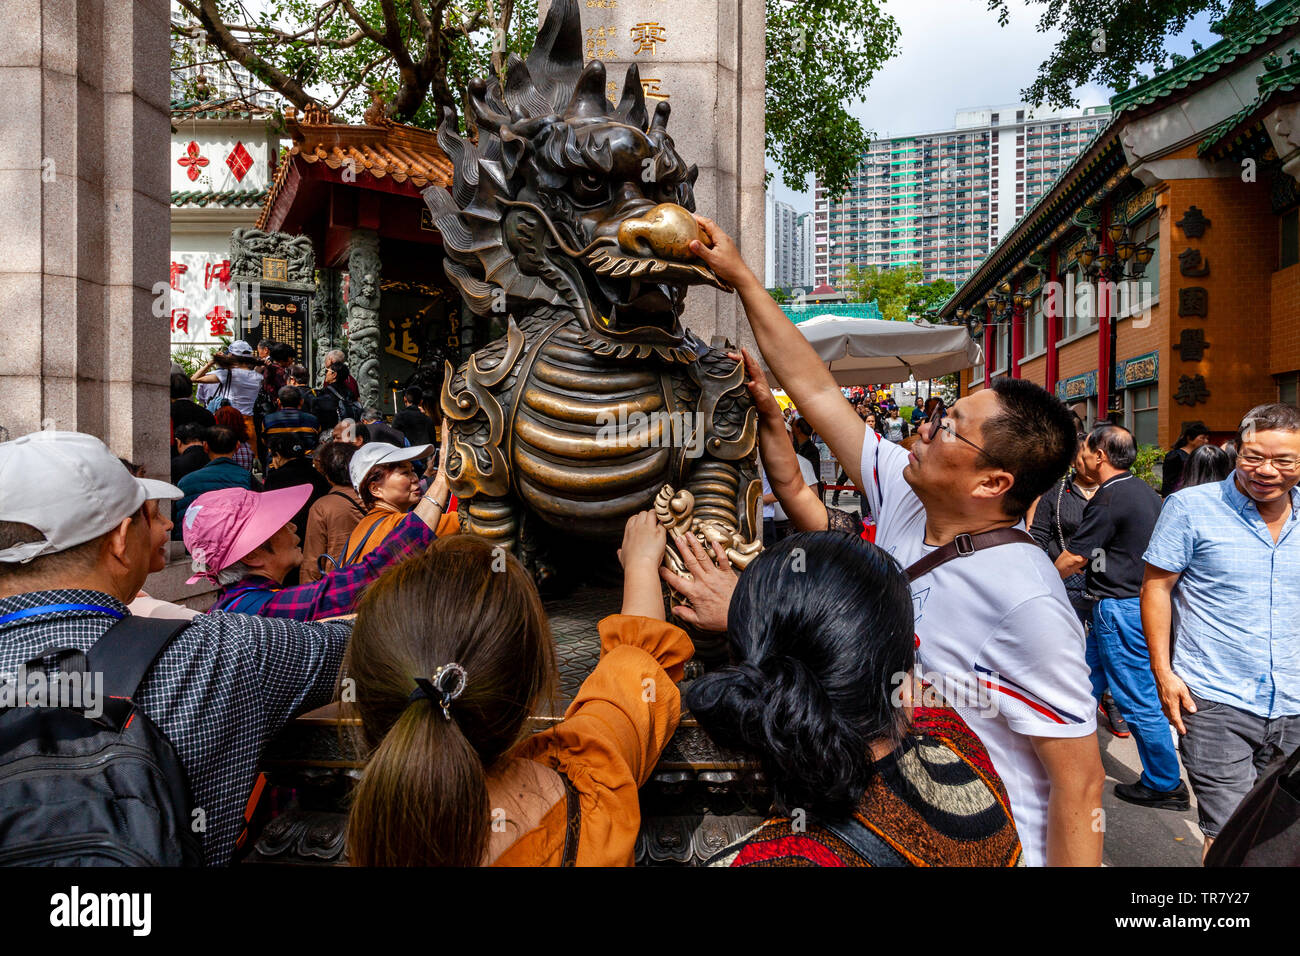 Chinese Tourists Rub The Dragon Statue For Good Luck At The Entrance To Wong Tai Sin Temple, Hong Kong, China Stock Photo